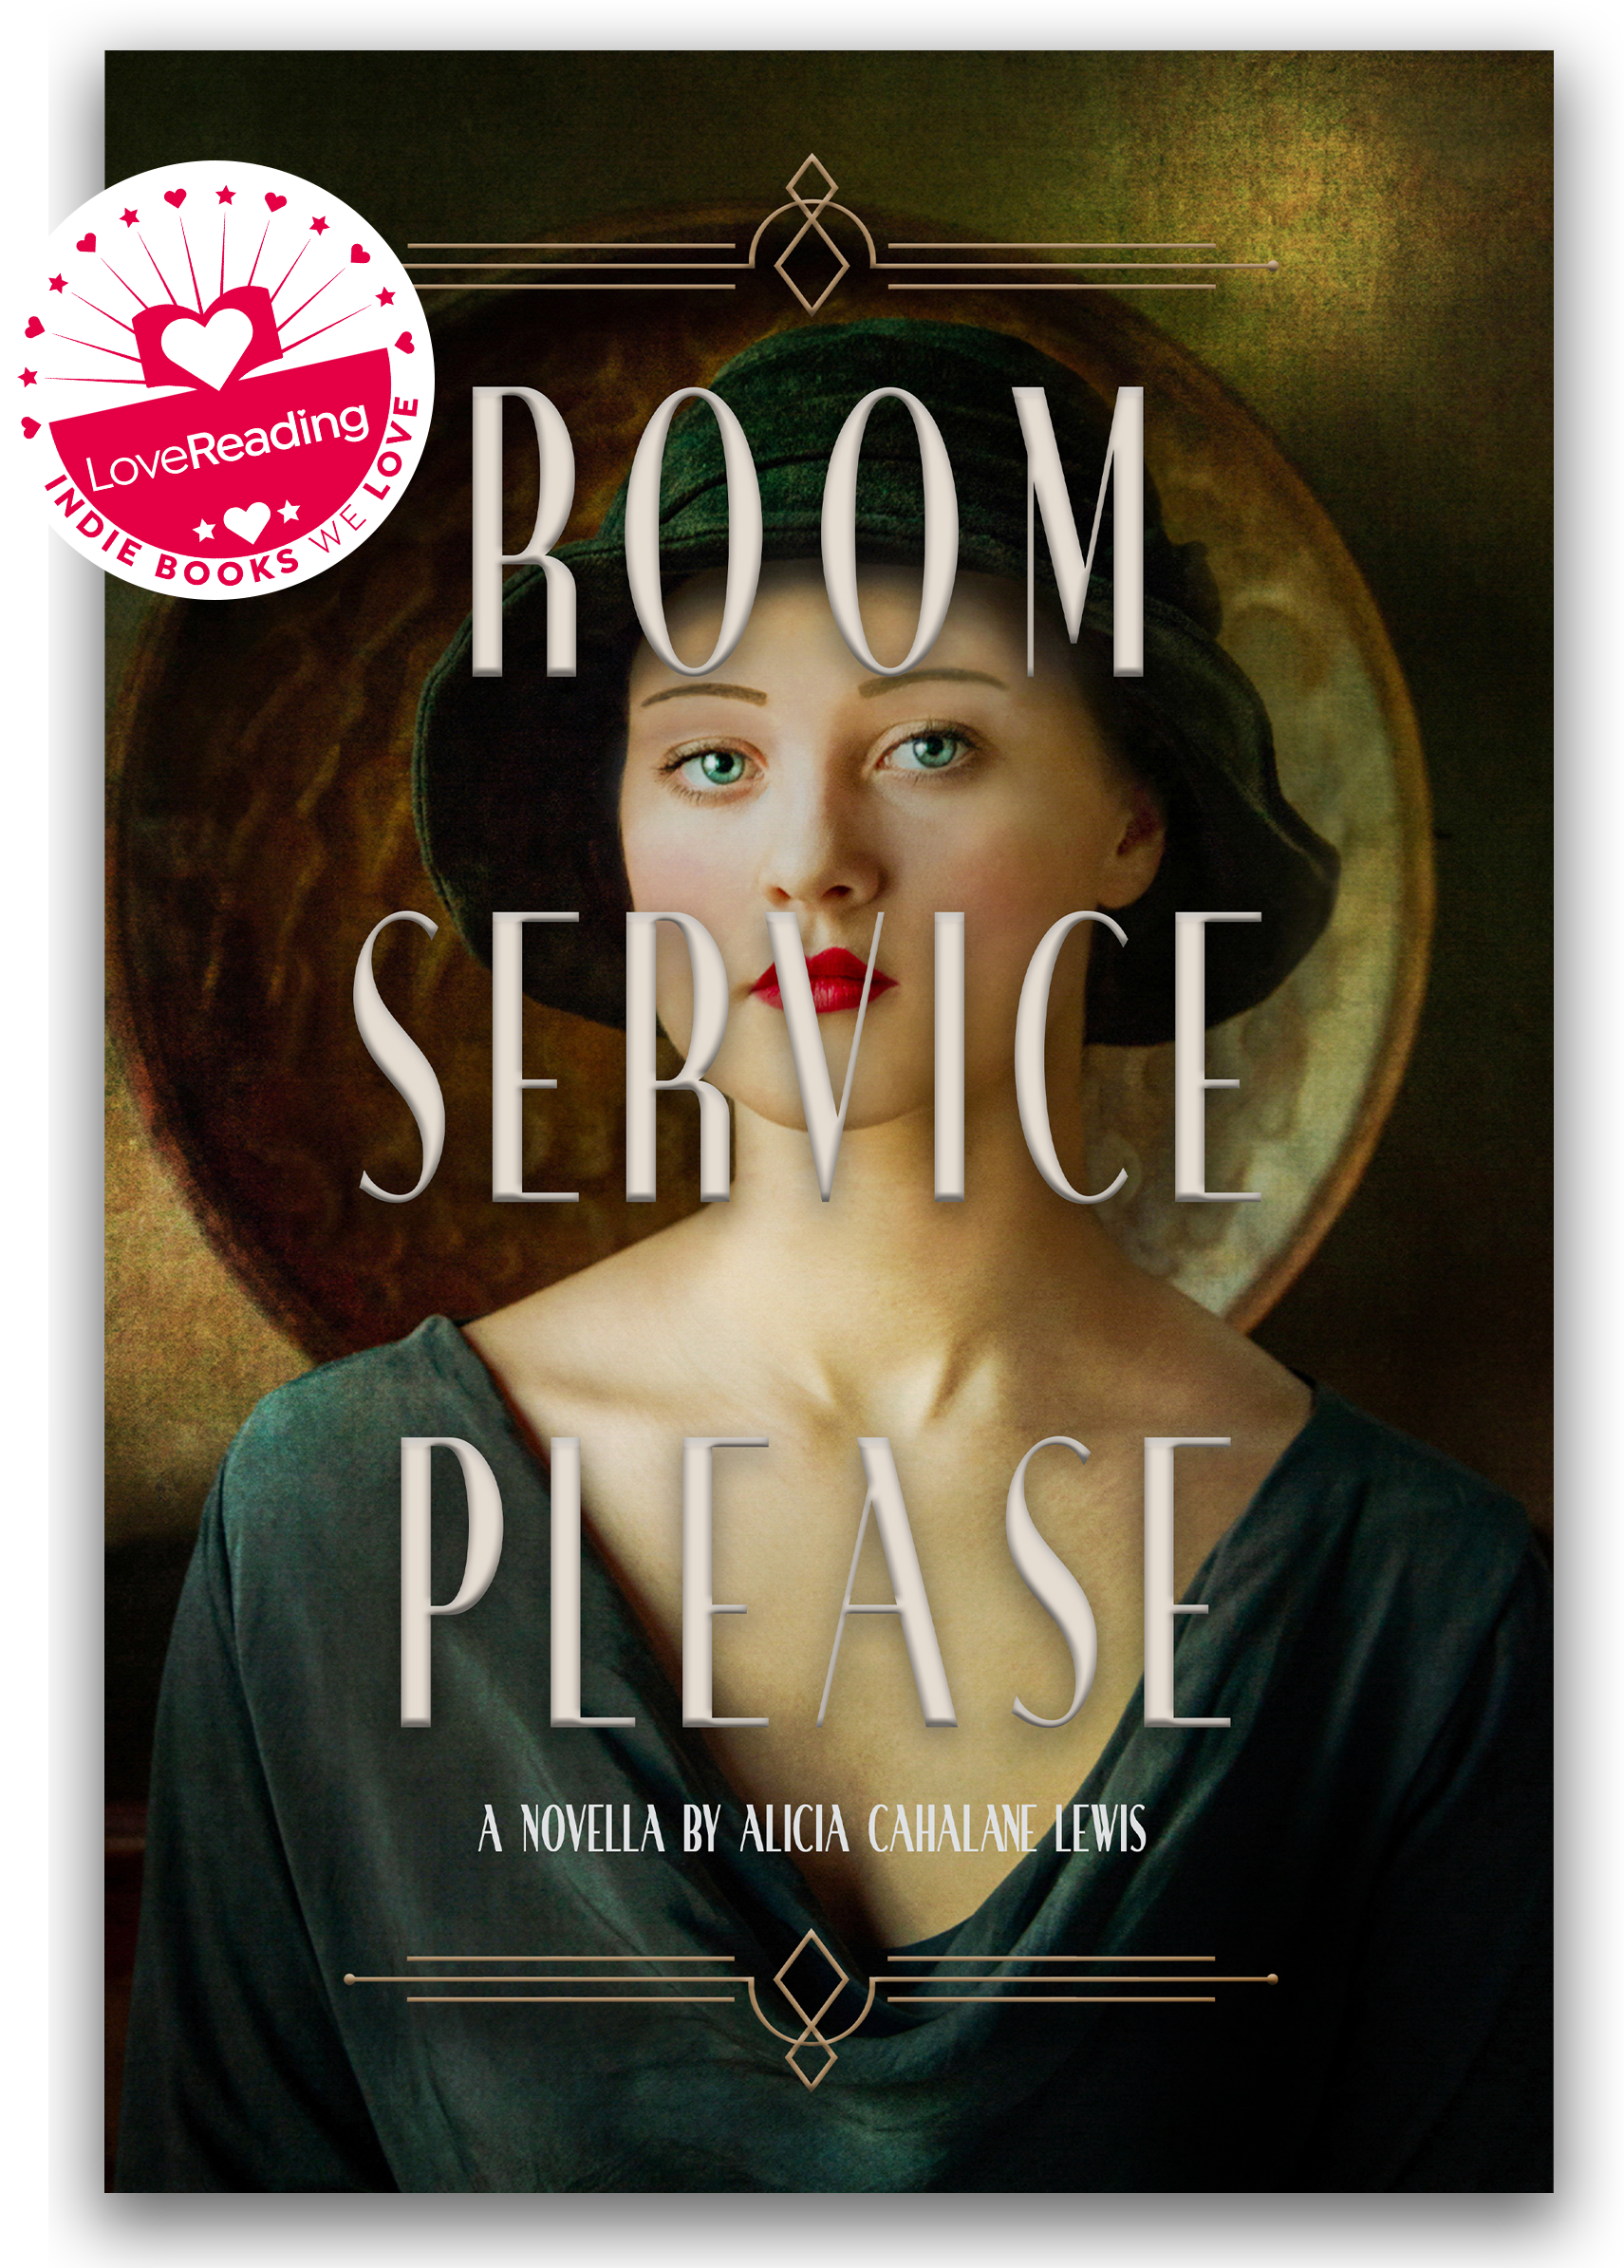 Room-service-please-coming-of-age-short-novella-book-club-choice-love-reading-uk.png